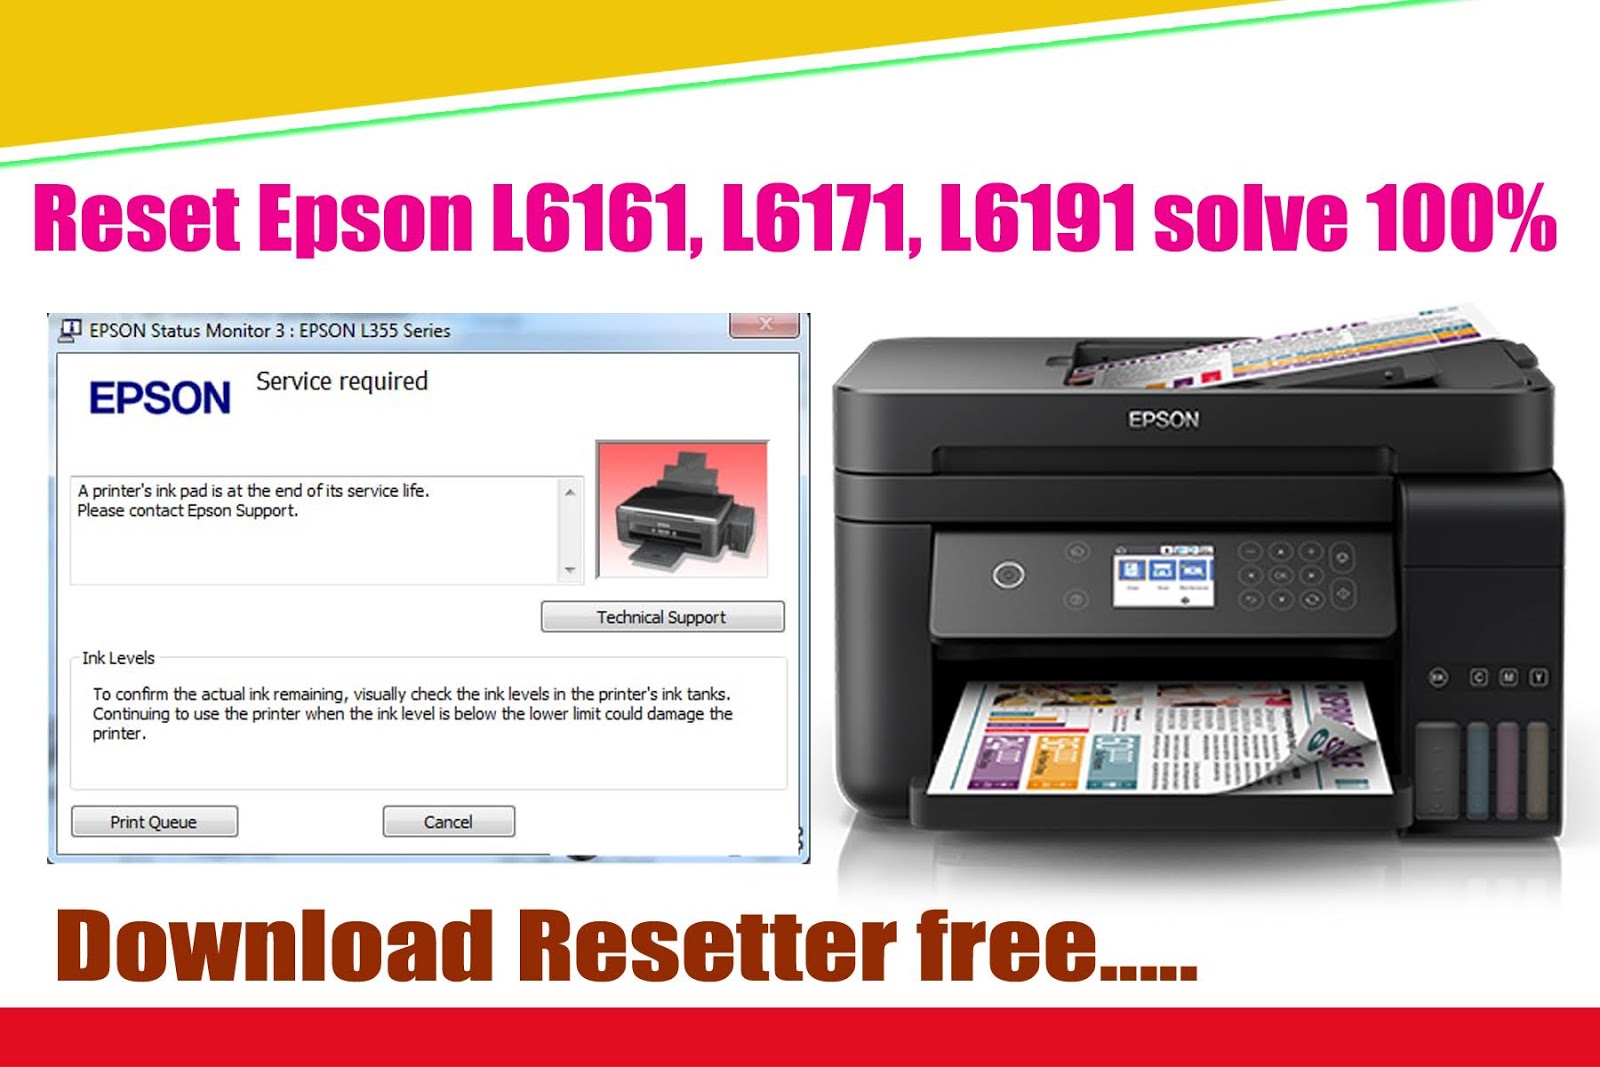 How to Reset Epson L3250 Printer with Nosware Epson L3250 Resetter: Step-by-Step Guide [SEO-Optimized]